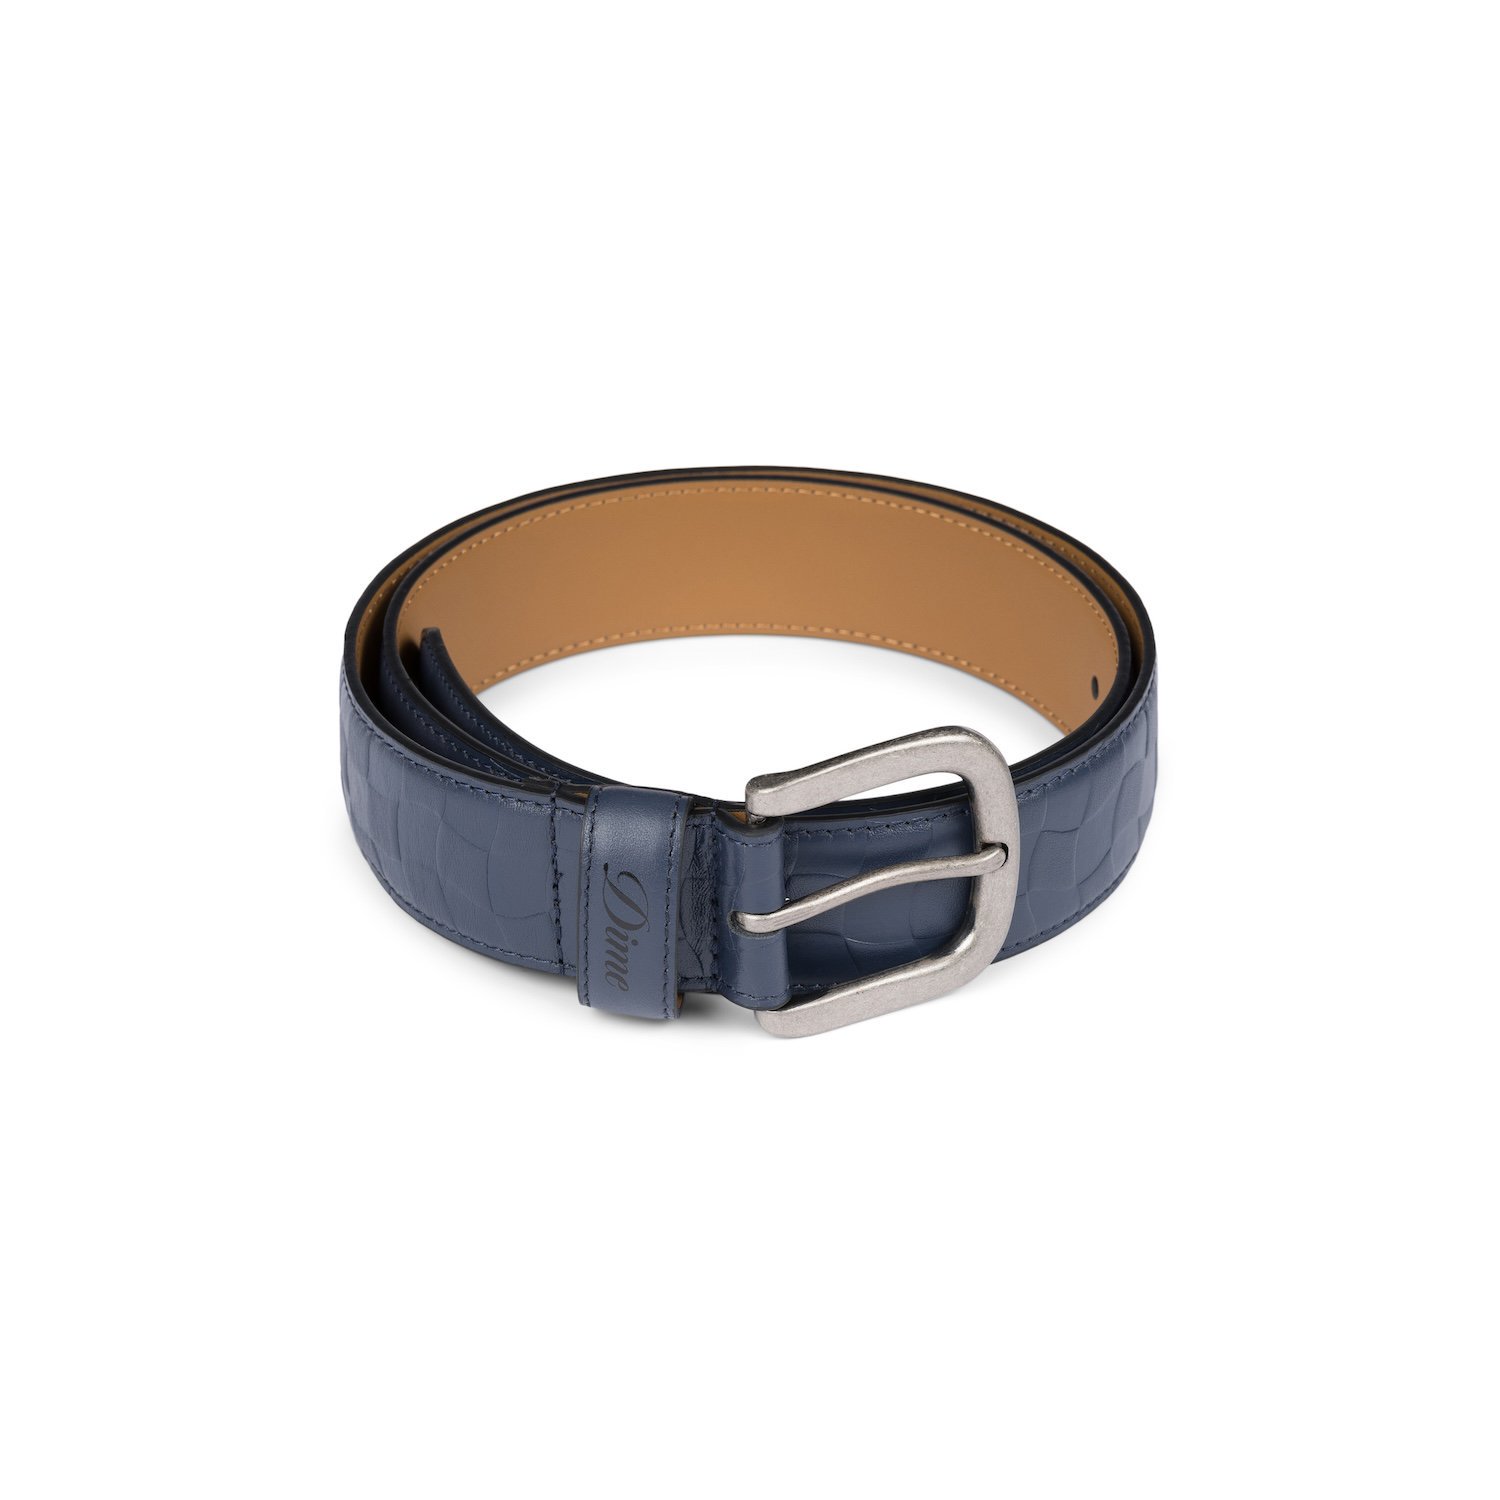 DIME<br>Checkered Leather Belt<br>